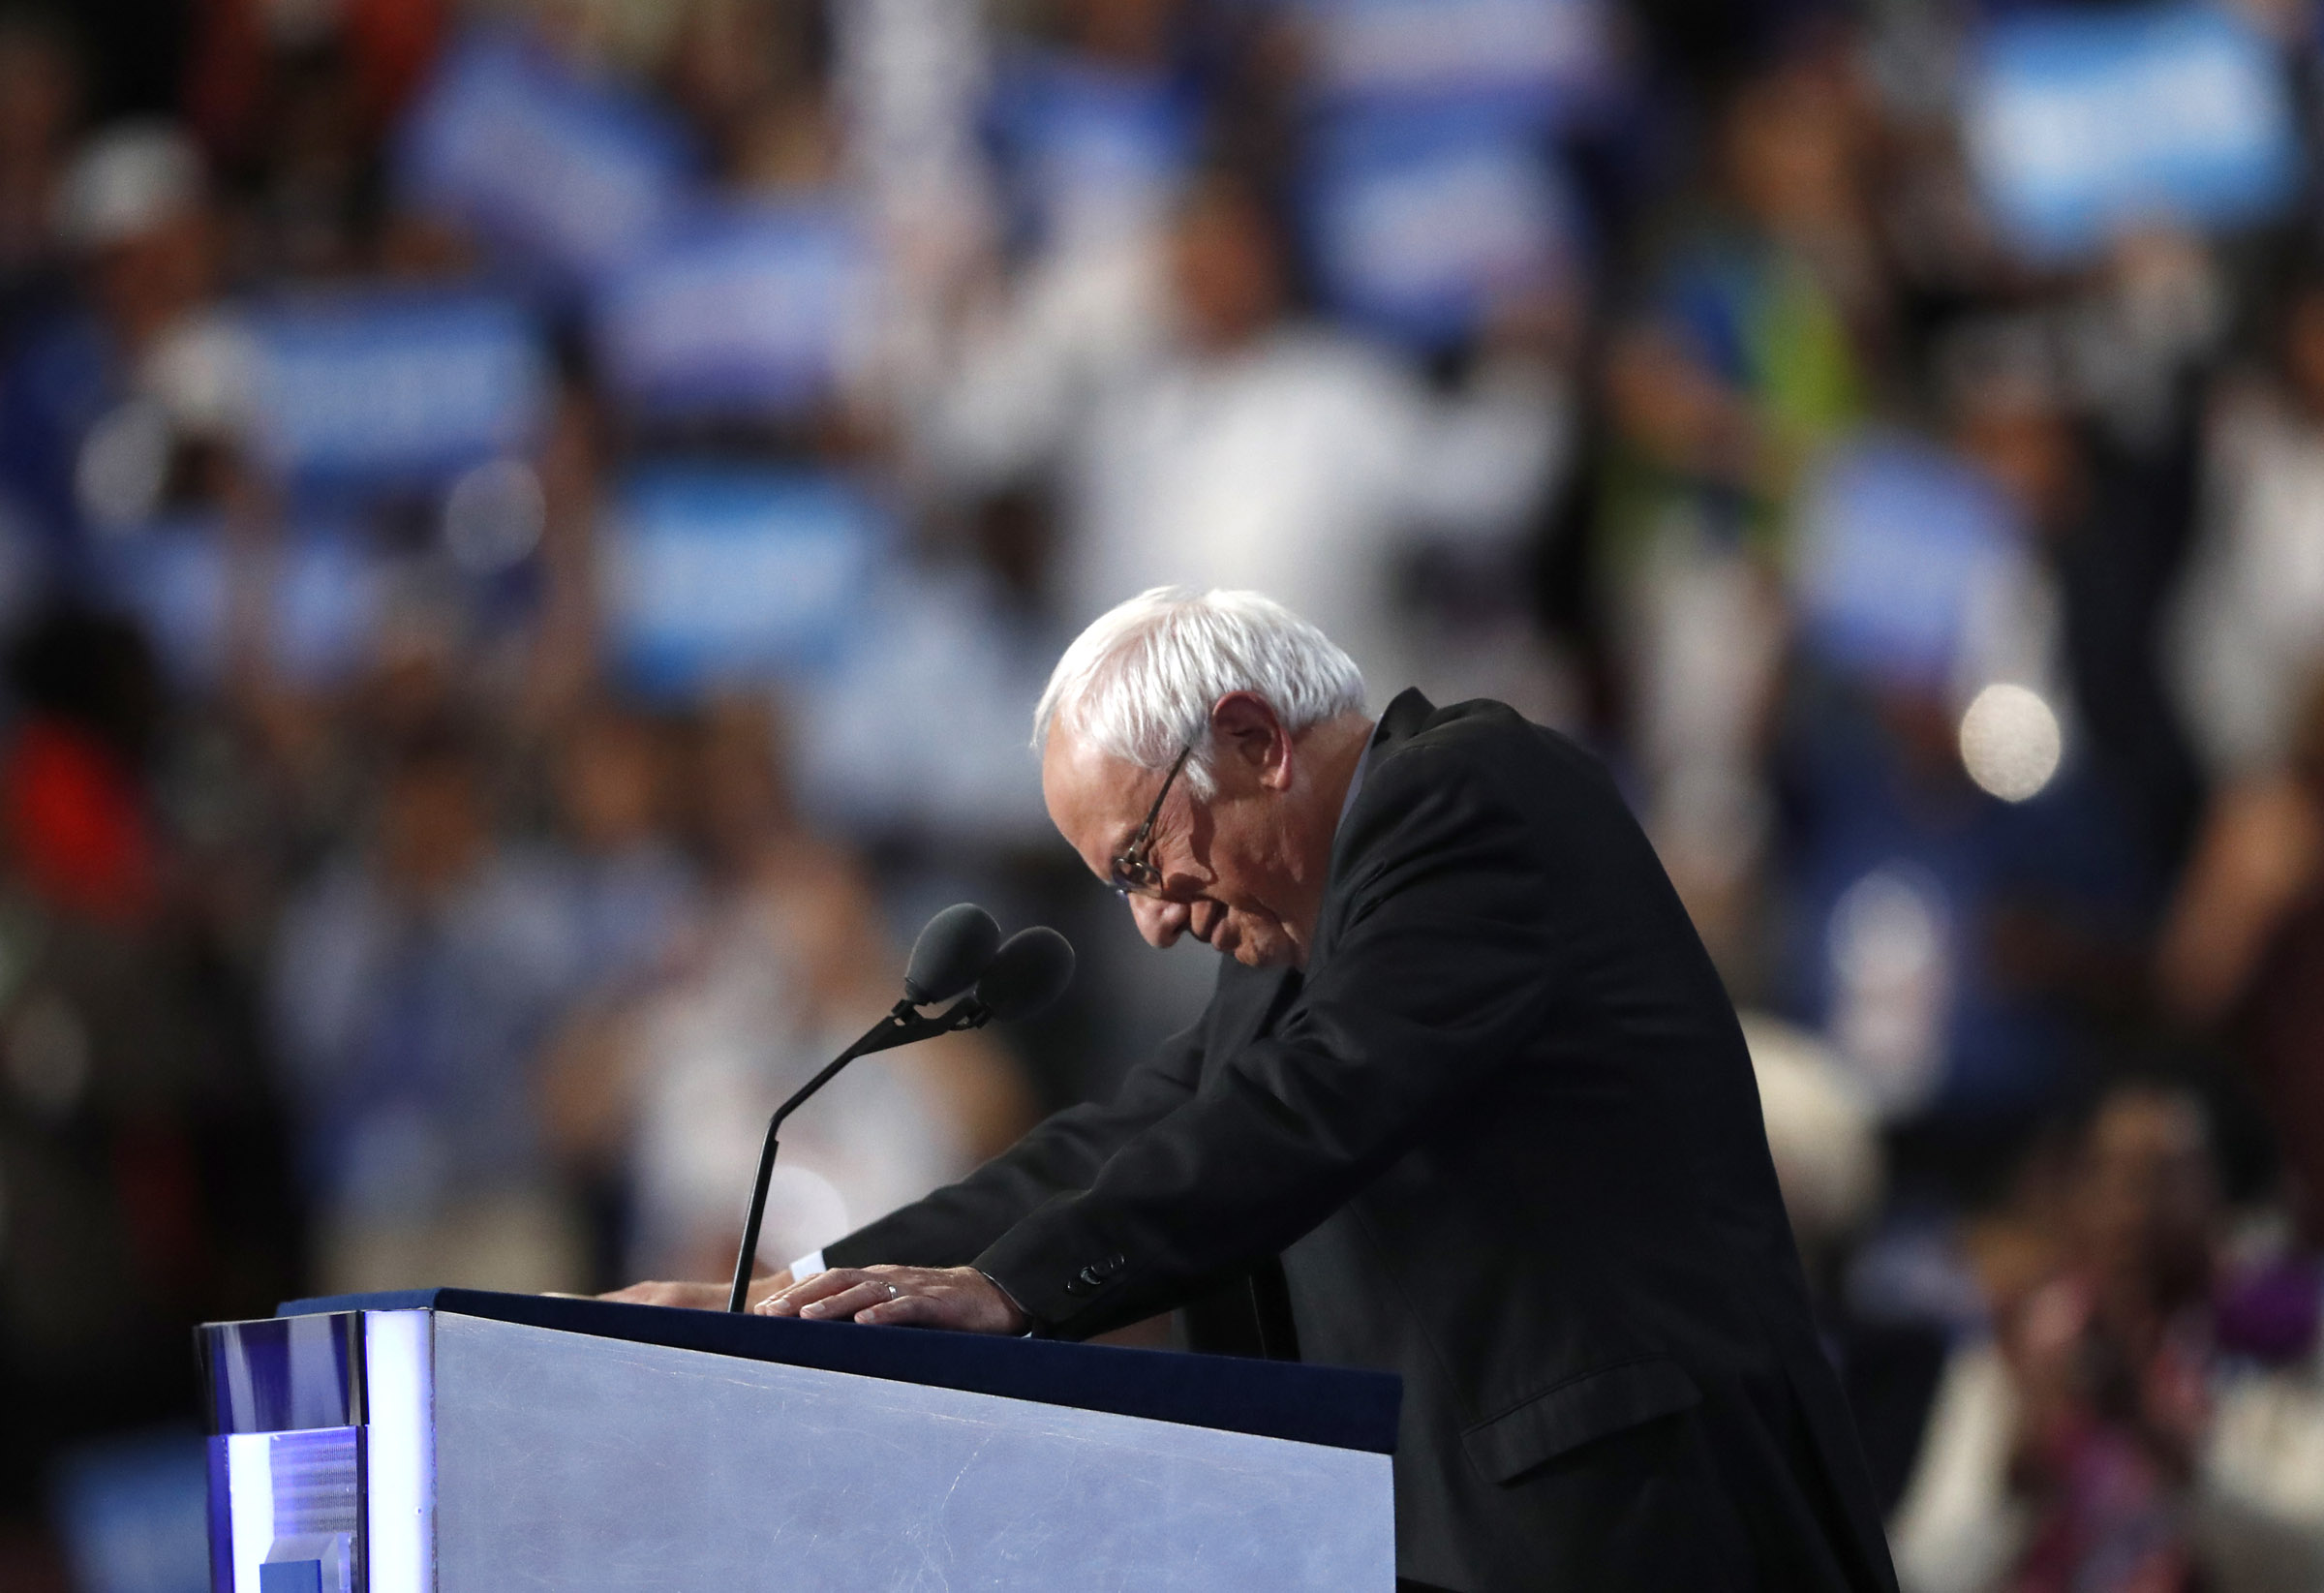 GALLERY: Democratic National Convention – Day 1